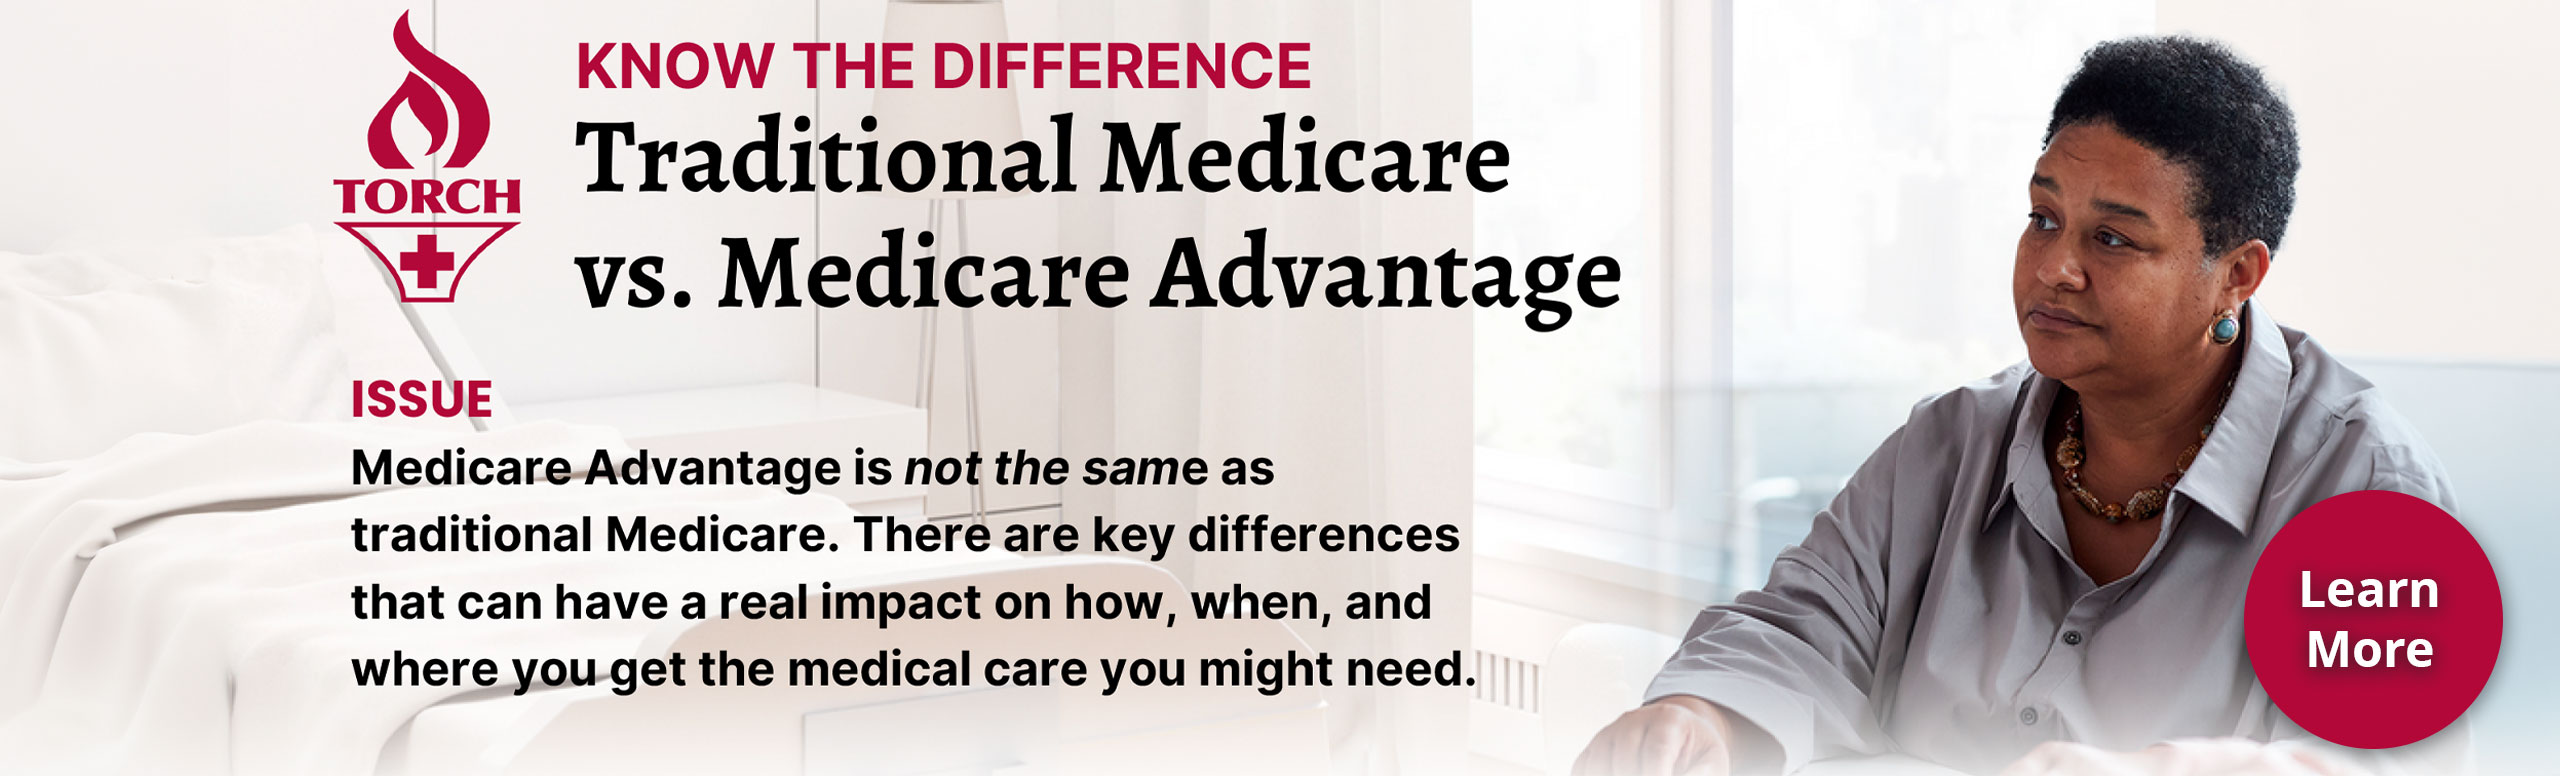 Know the Difference

Traditional Medicare vs. Medicare Advantage

Issue: Medicare Advantage is not the same as traditional Medicare.  There are key differences that can have a real impact on how, when, and where you get the medical care you might need.